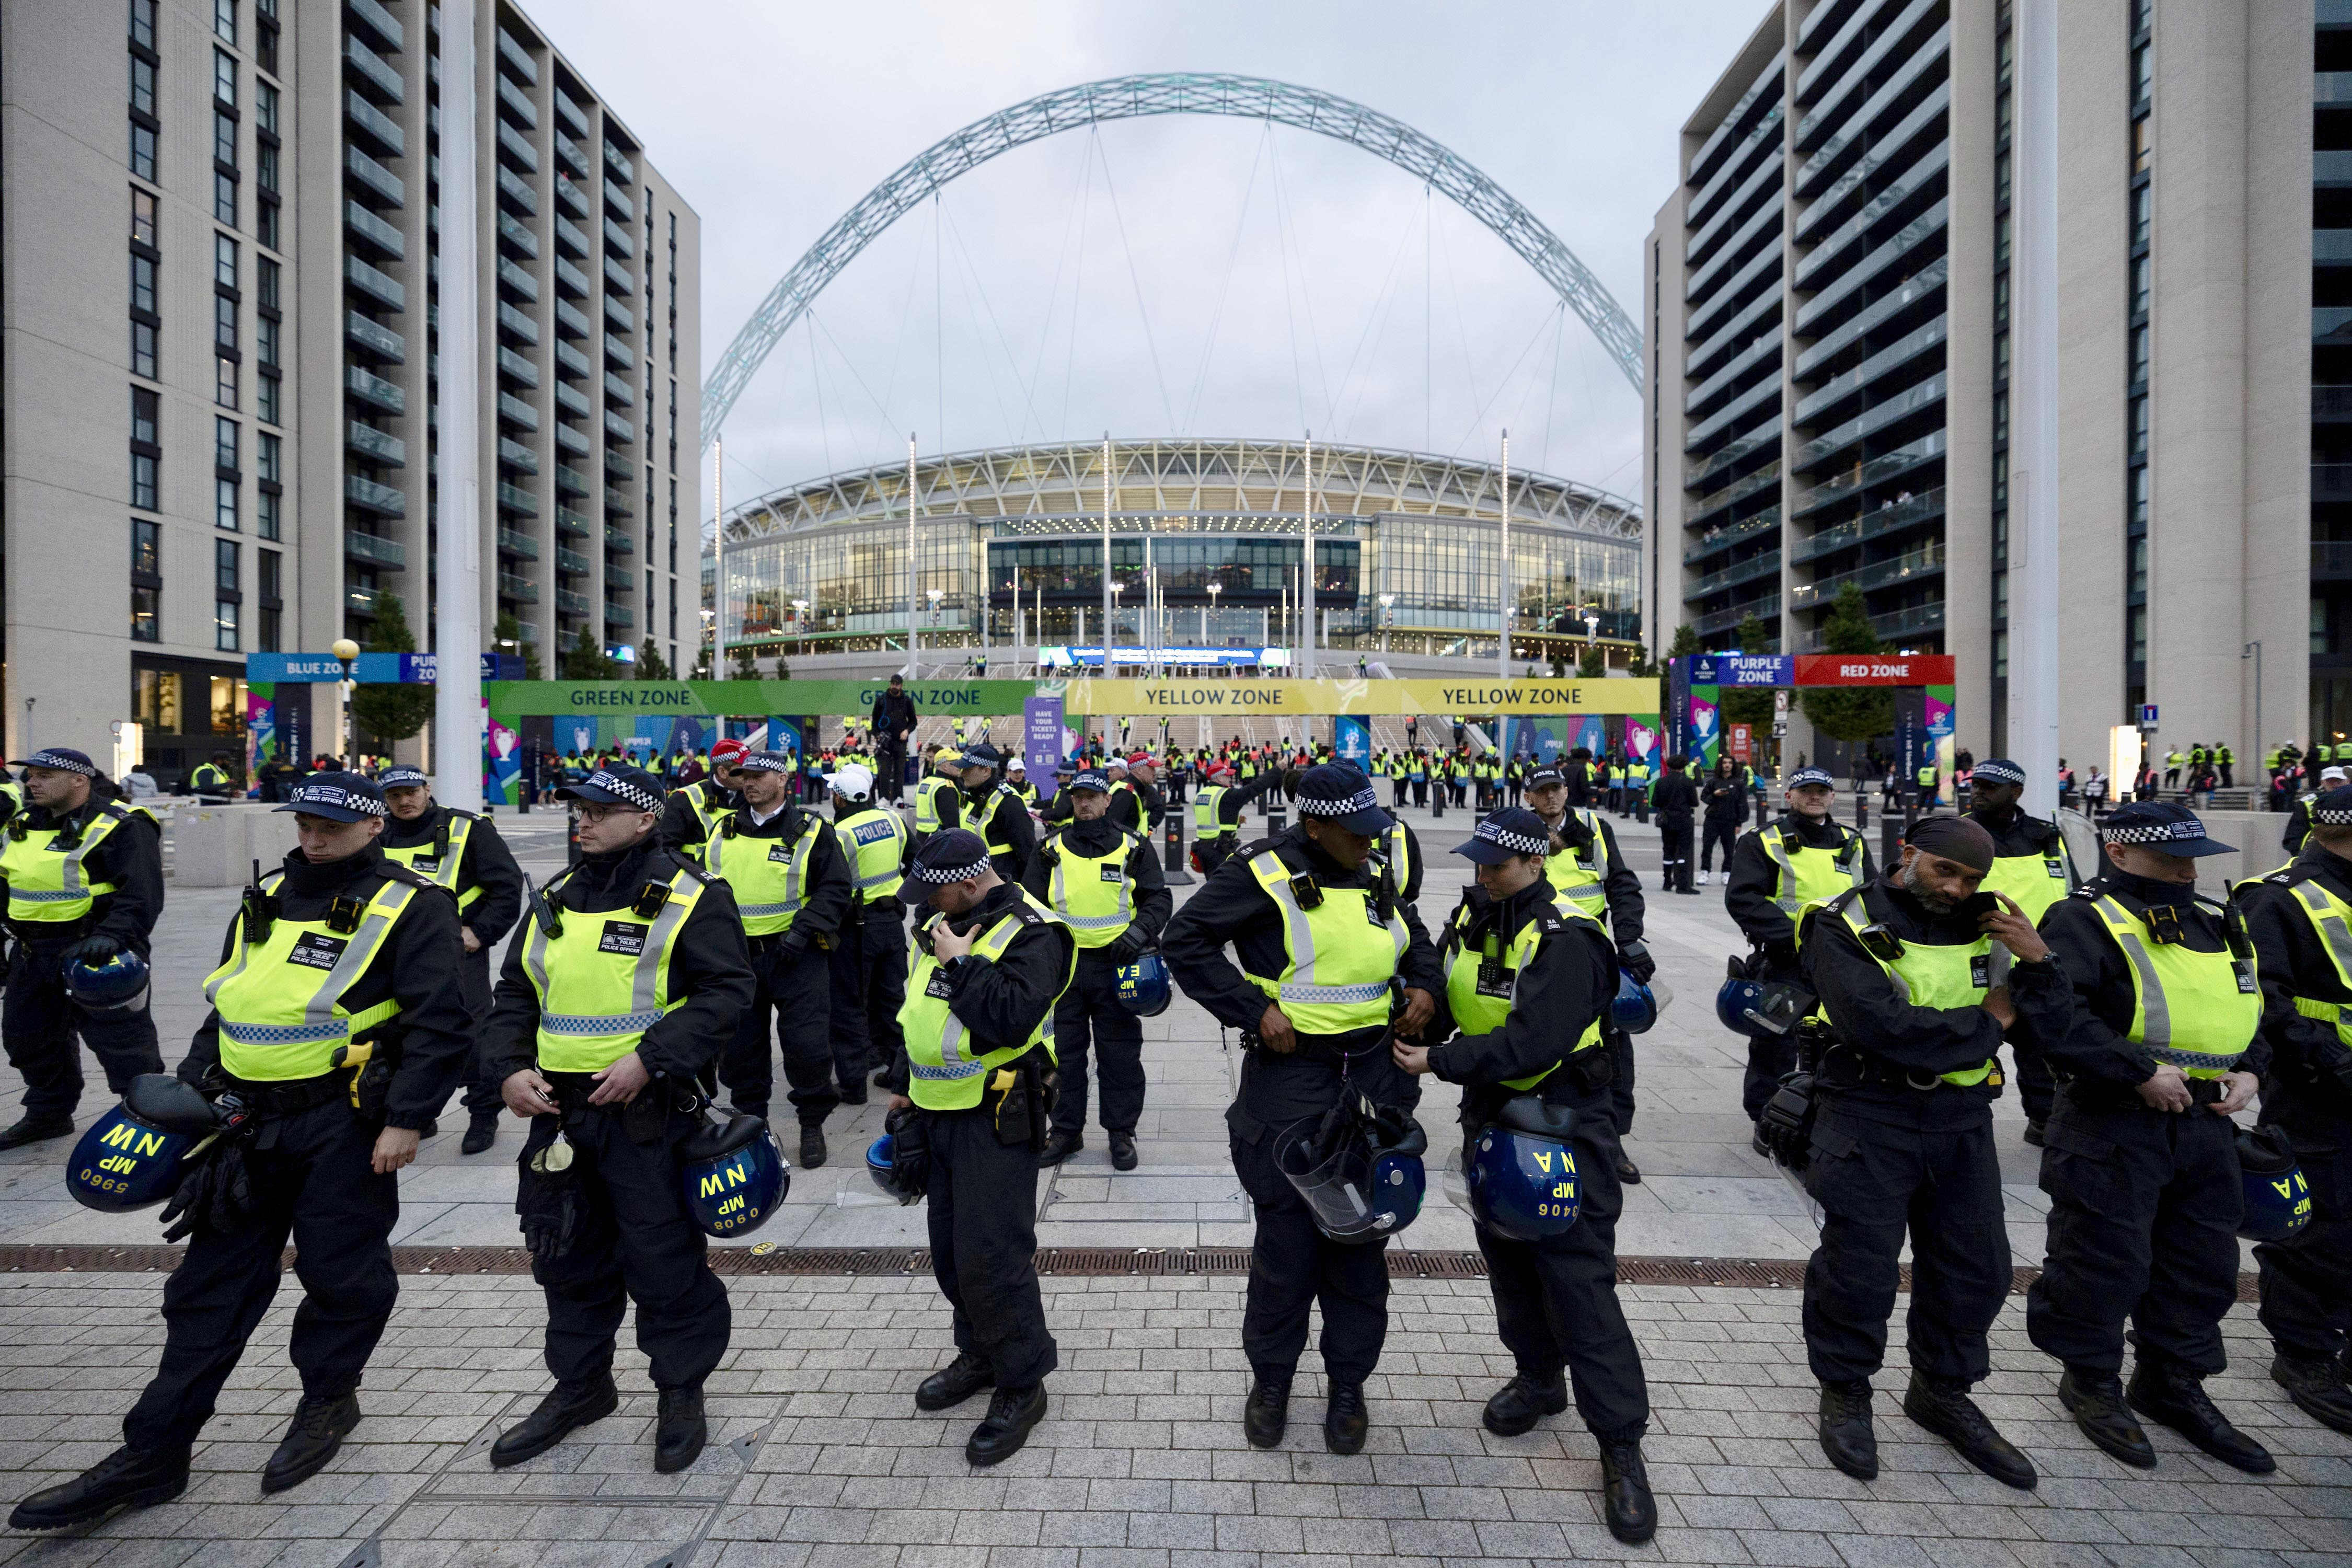 Cops were out in force at Wembley eiqeuihhiddinv